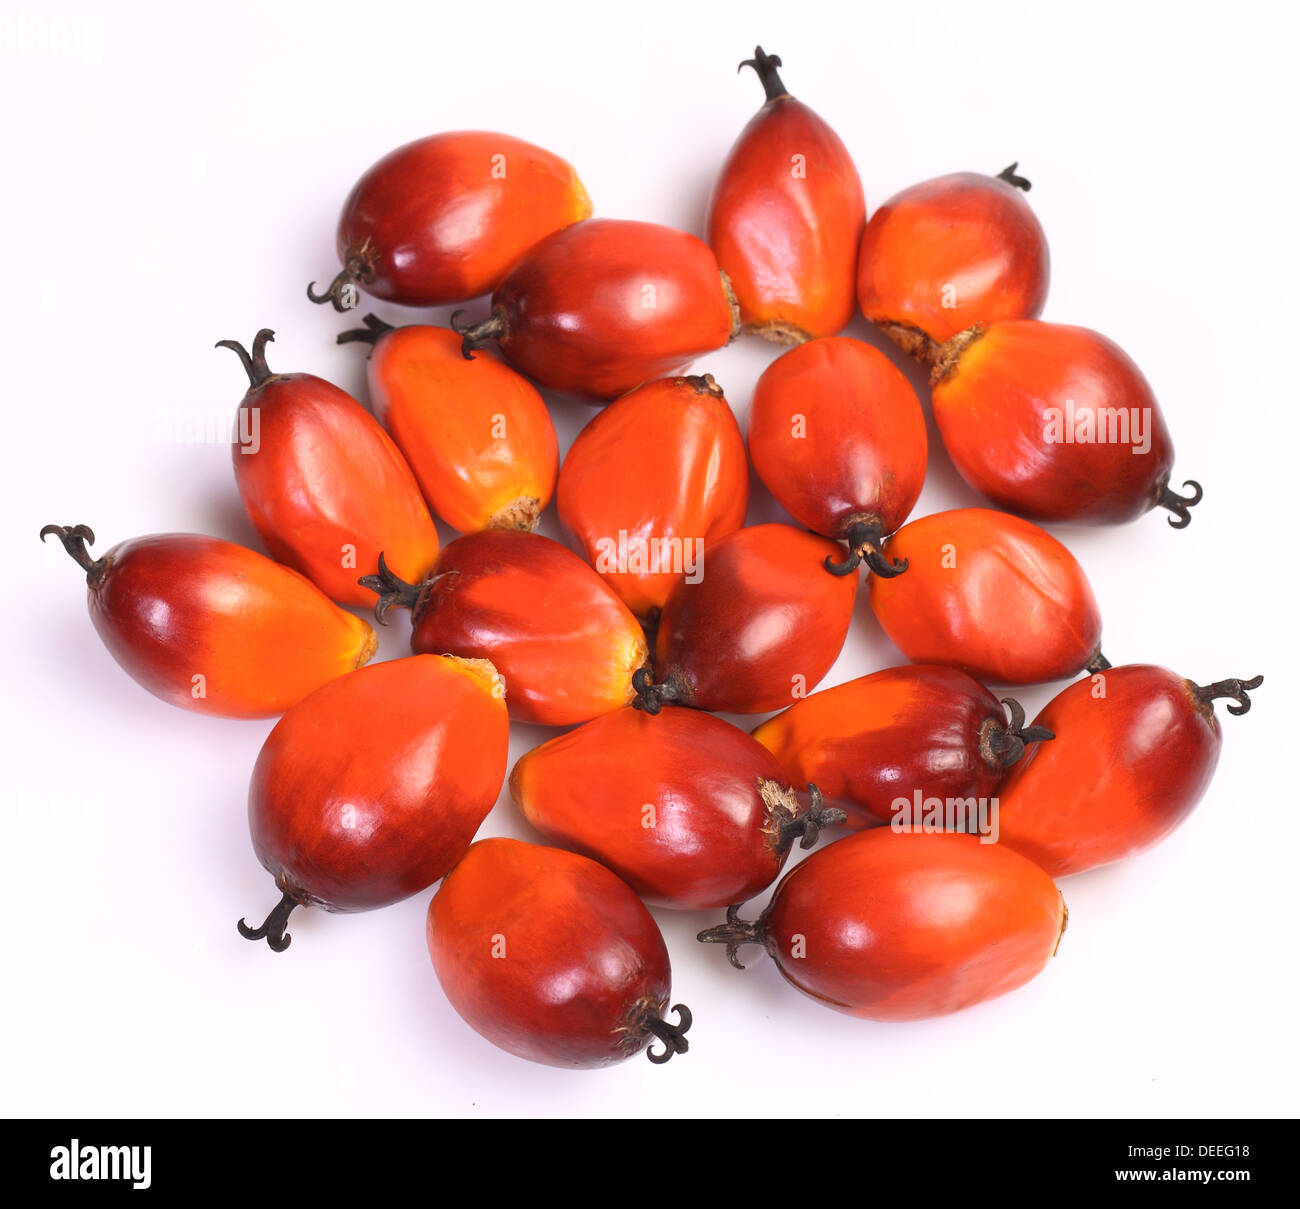 A group of oil palm fruits on the white background Stock Photo